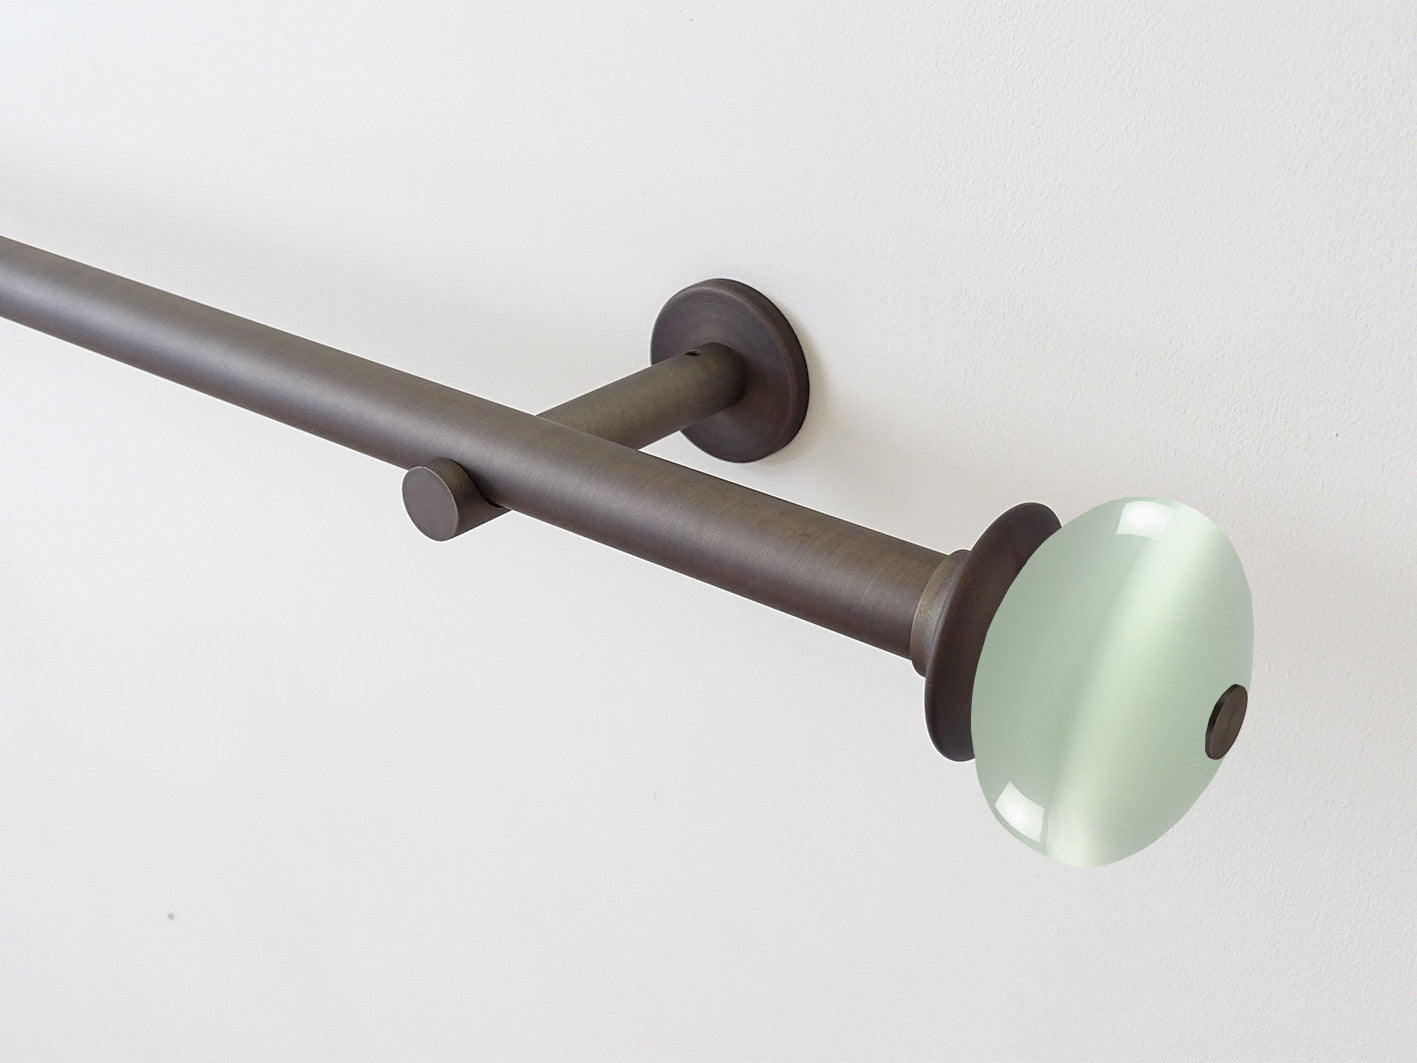 19mm brushed bronze curtain pole set with glass moonstone finials in opal white